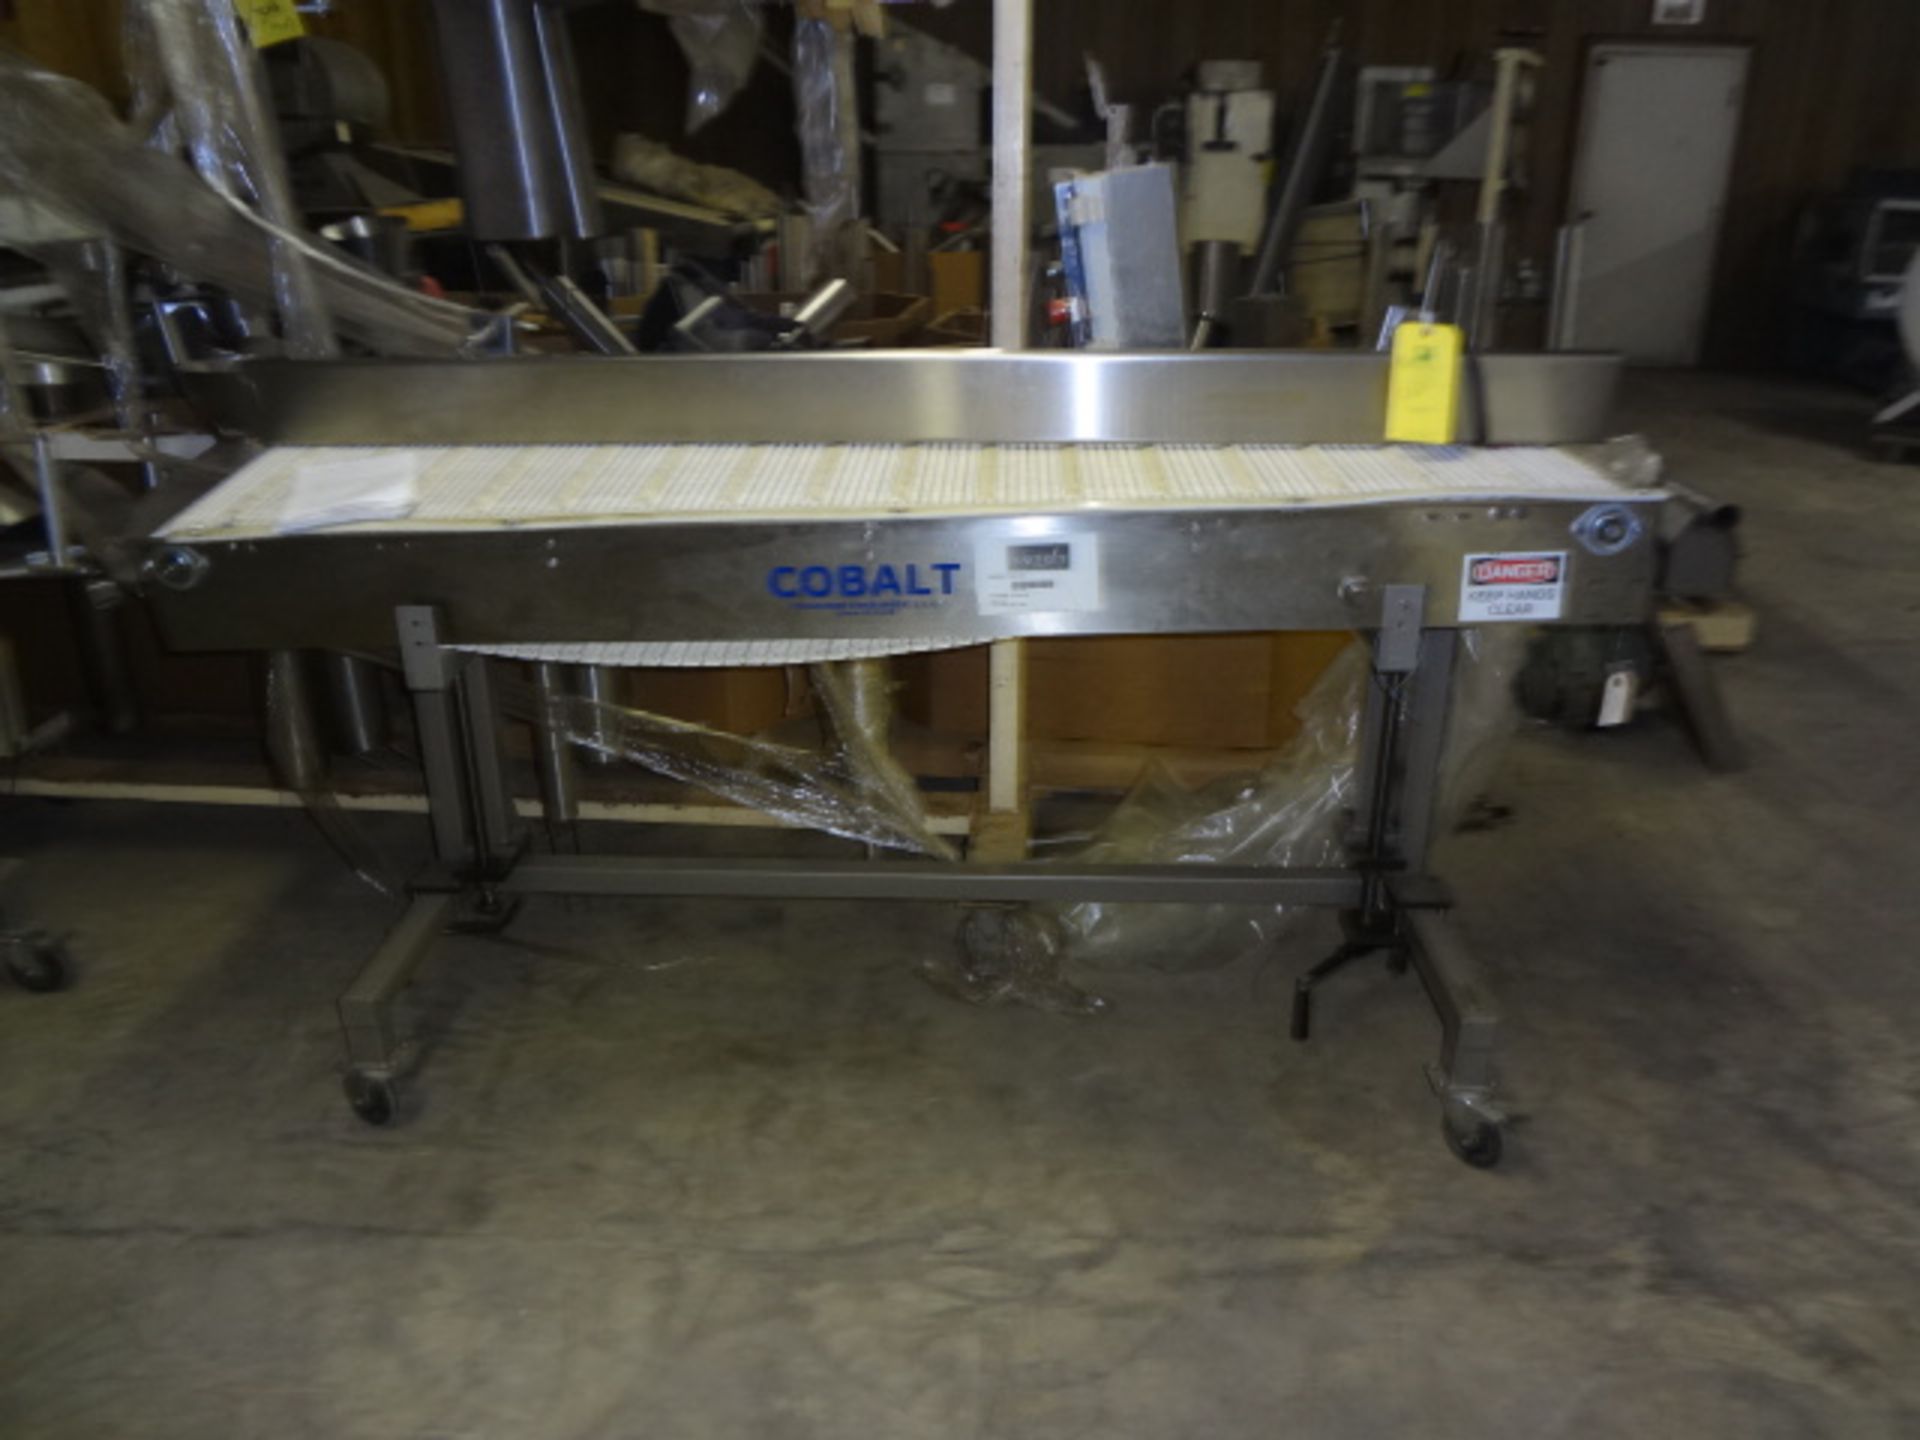 qty 2 - 14 “ w x 6’ l belt conveyor Rigging Fee for the item: $50 - Image 2 of 3